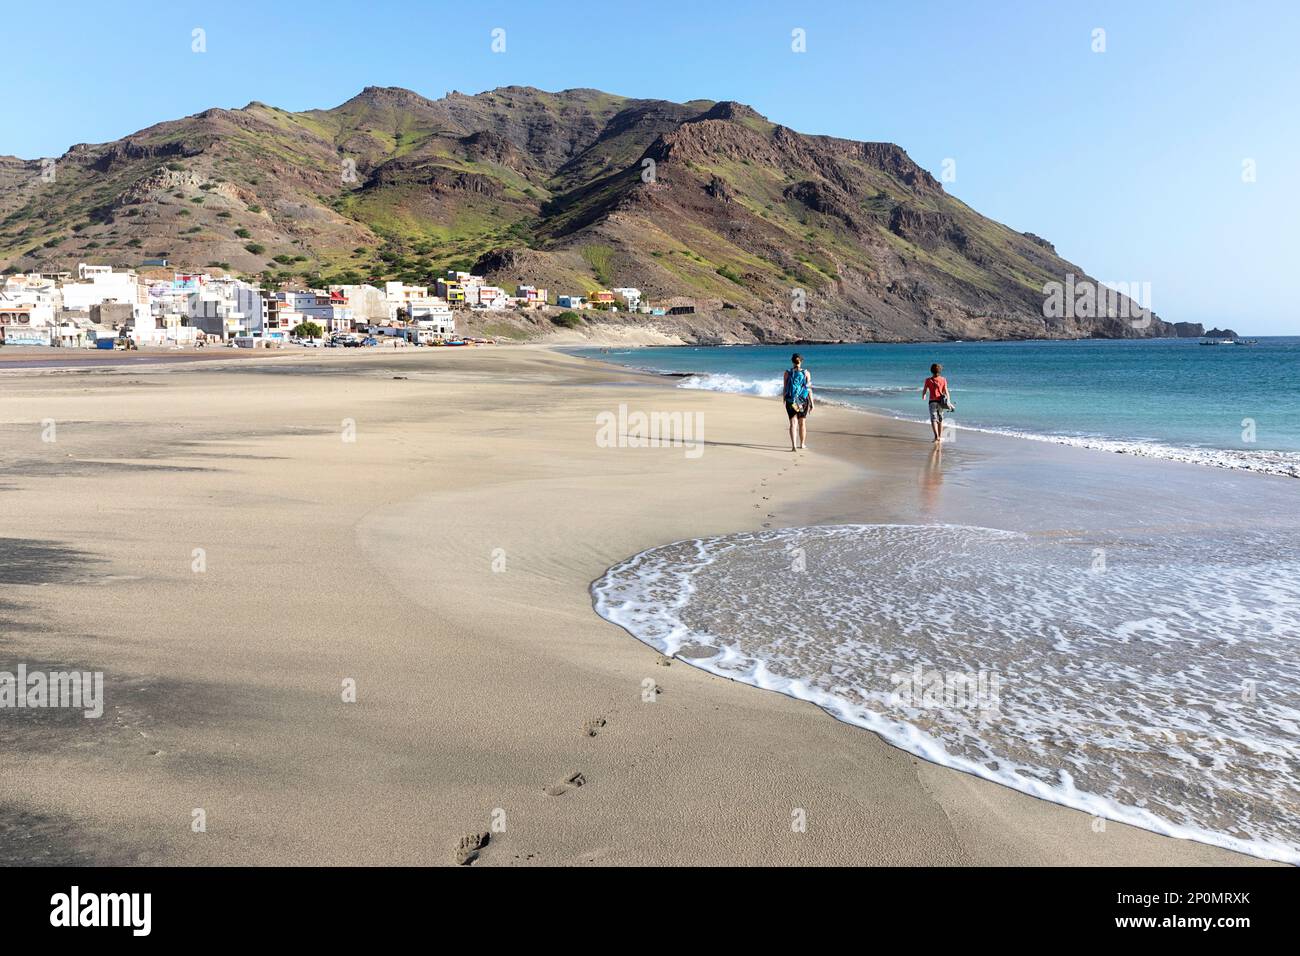 Mother and son on a family trip walking on a beautiful Sao pedro sandy beach with fishing village and mountains at the back, Sao vicente, Cabo verde Stock Photo